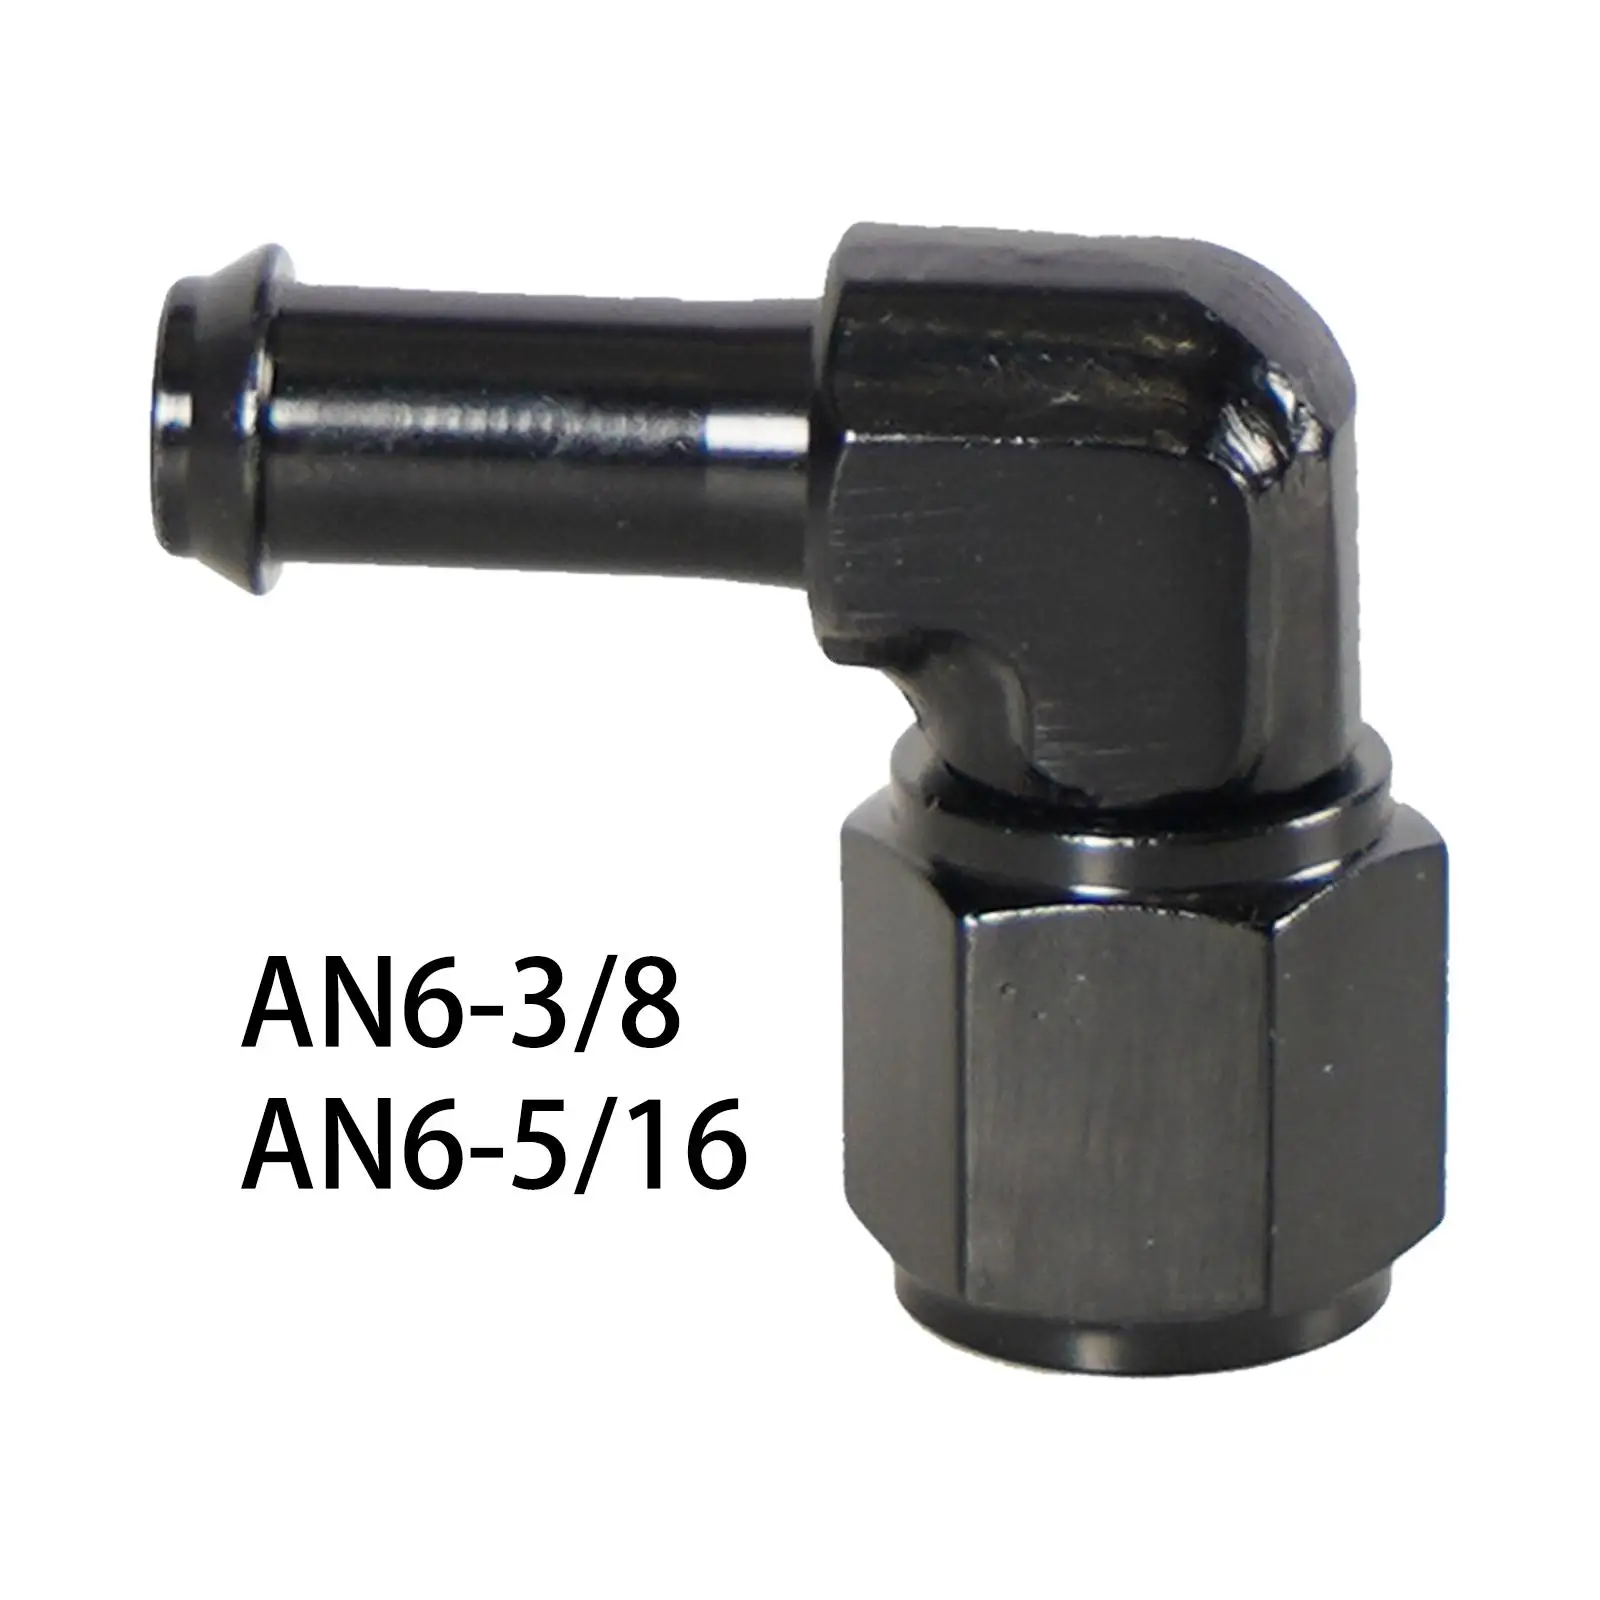 AN6 Female Hose Fittings Adaptor 90 Degree for Oil Fuel Gas Water Fluid Hose Ends